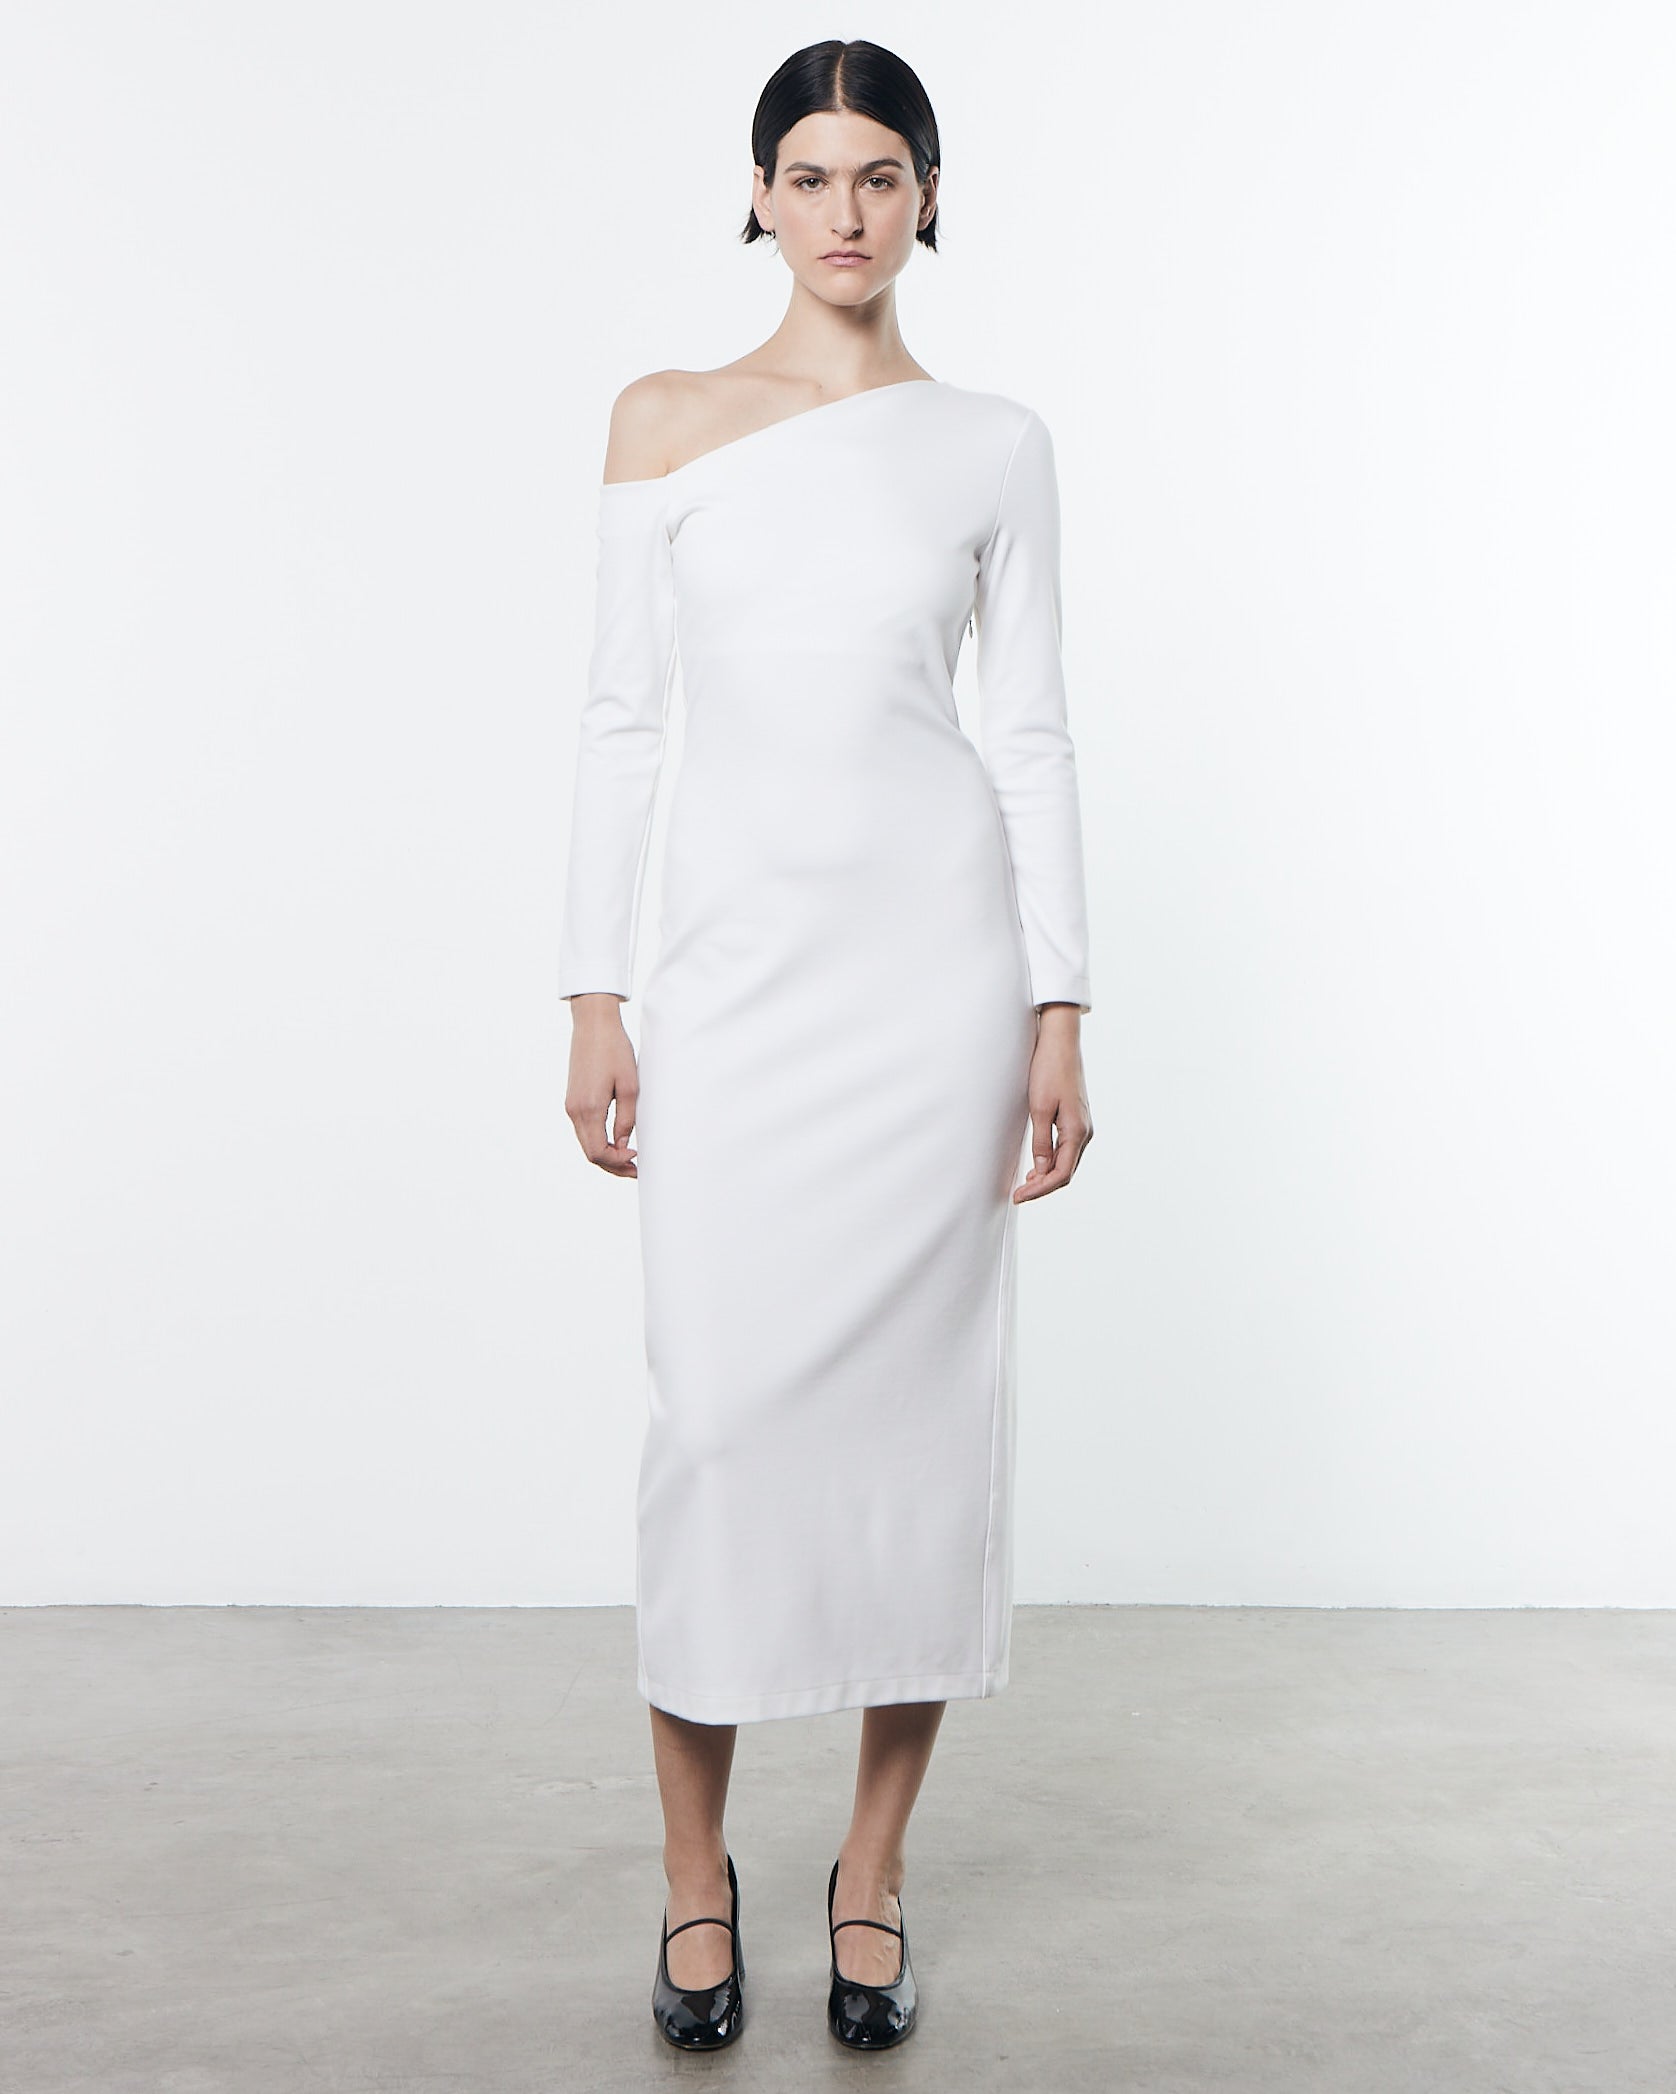 Exposed Shoulder Dress | Off White – Enza Costa